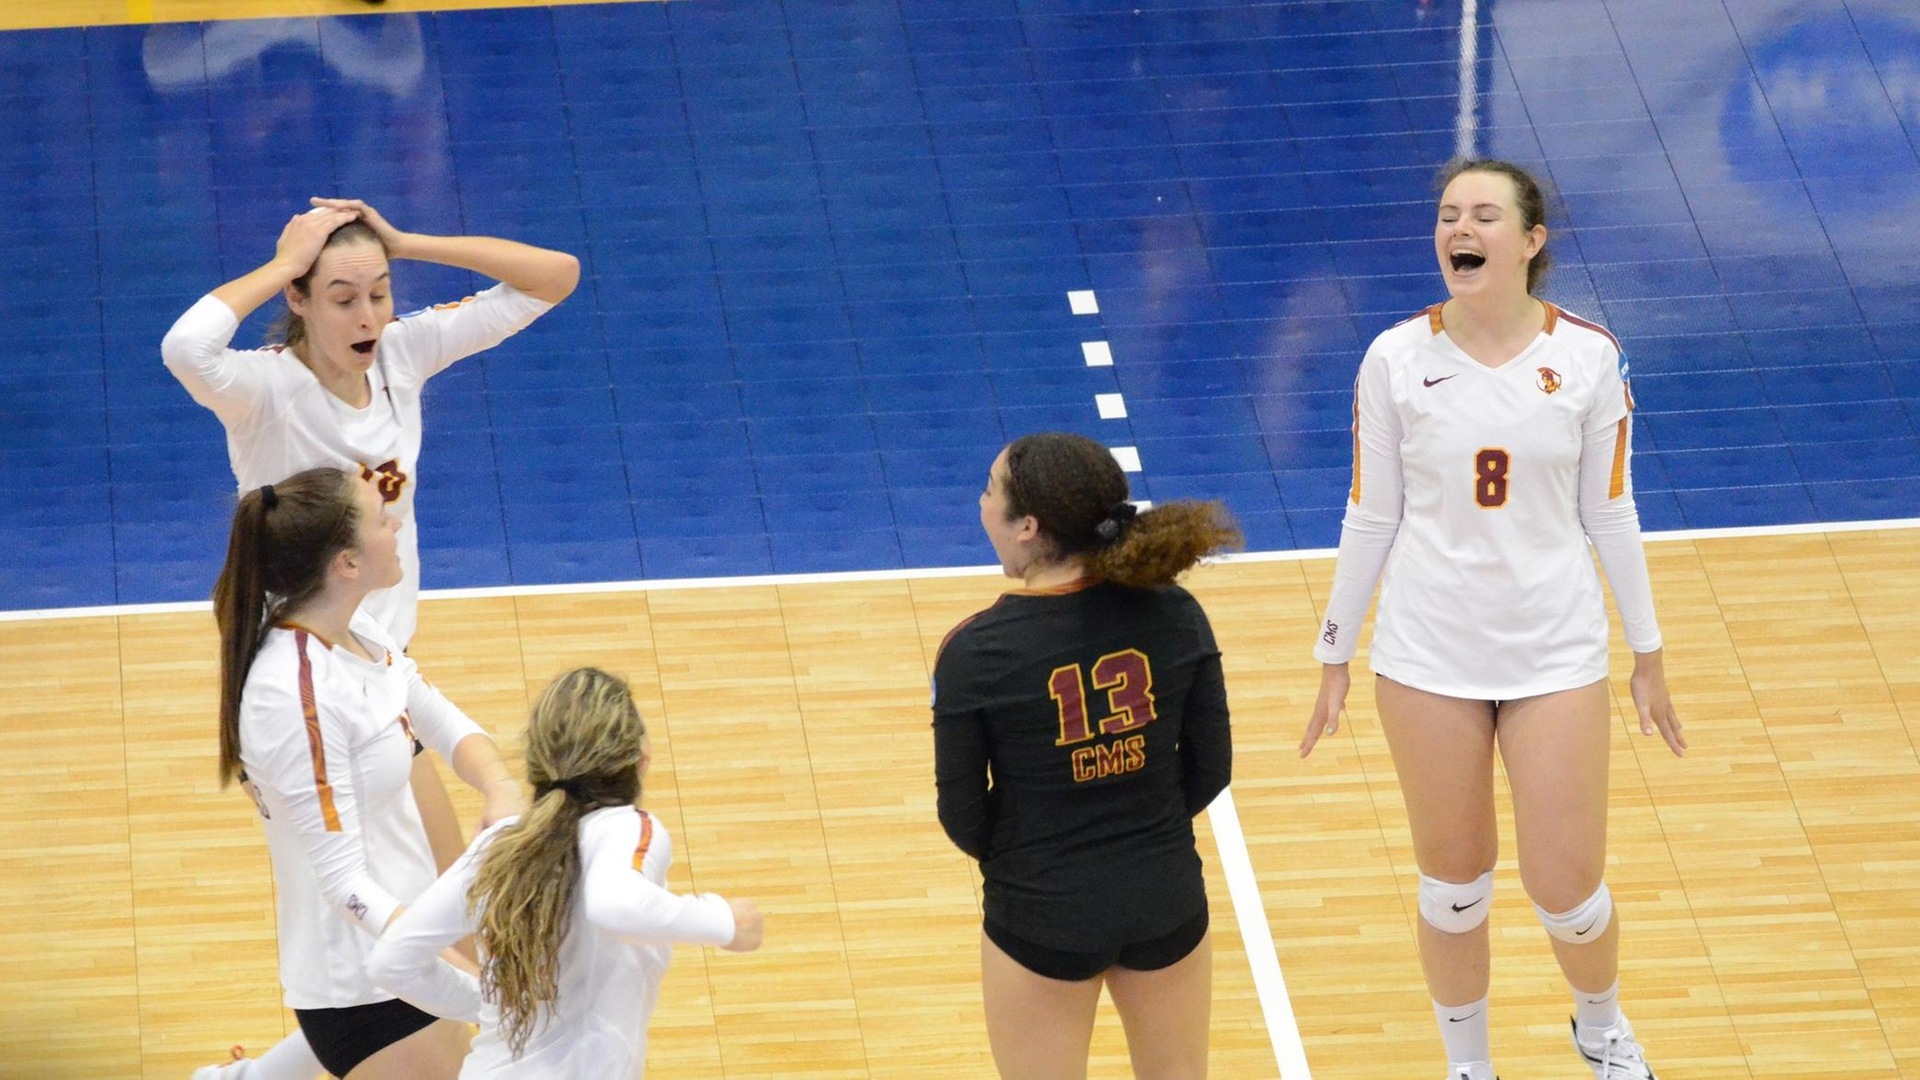 CMS celebrates match point in the quarterfinals (photo by Ricky Bassman)